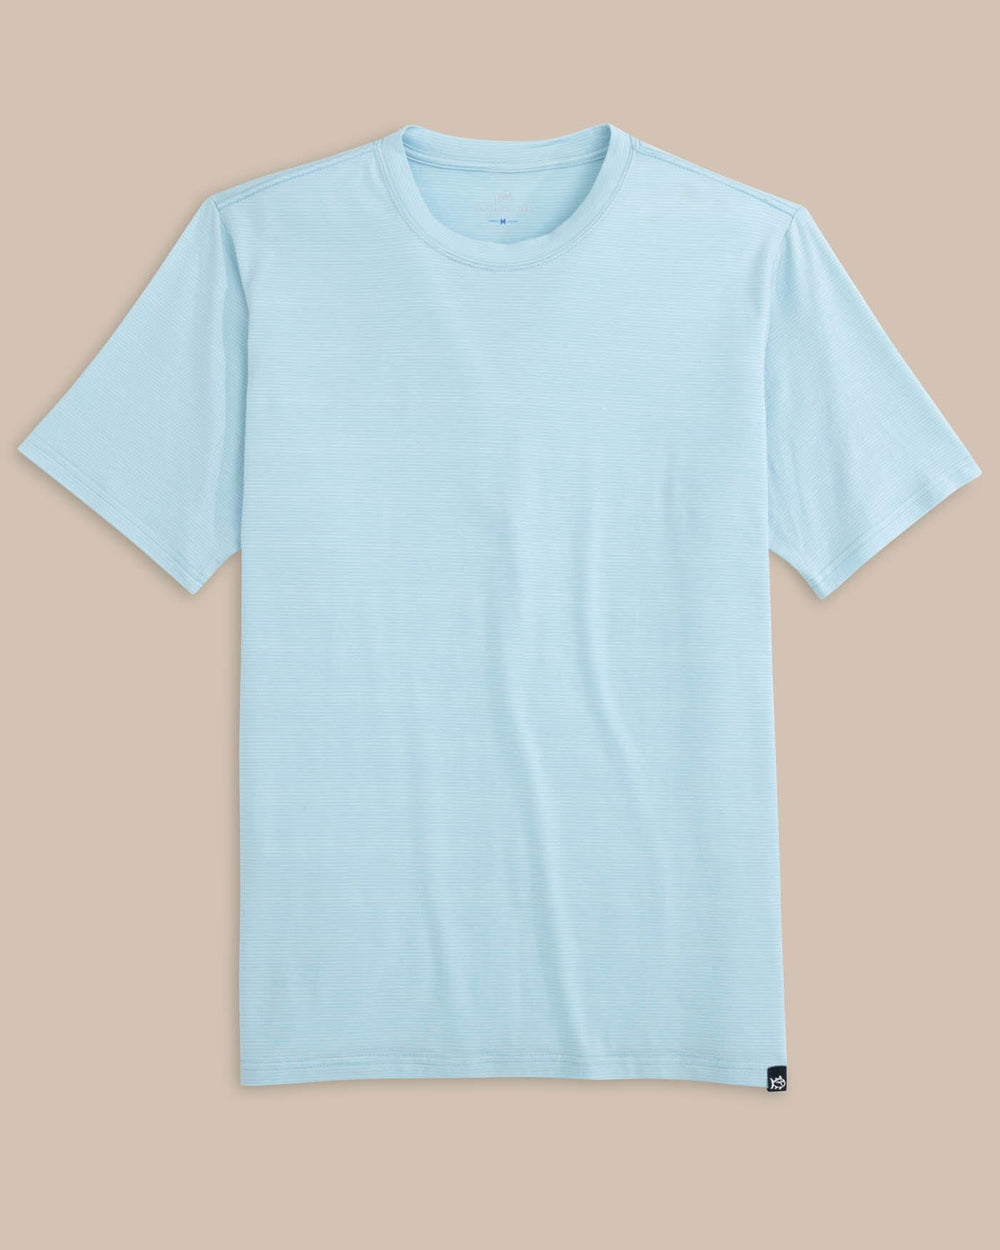 The front view of the Southern Tide The Seaport Davenport Stripe Tee by Southern Tide - Clearwater Blue